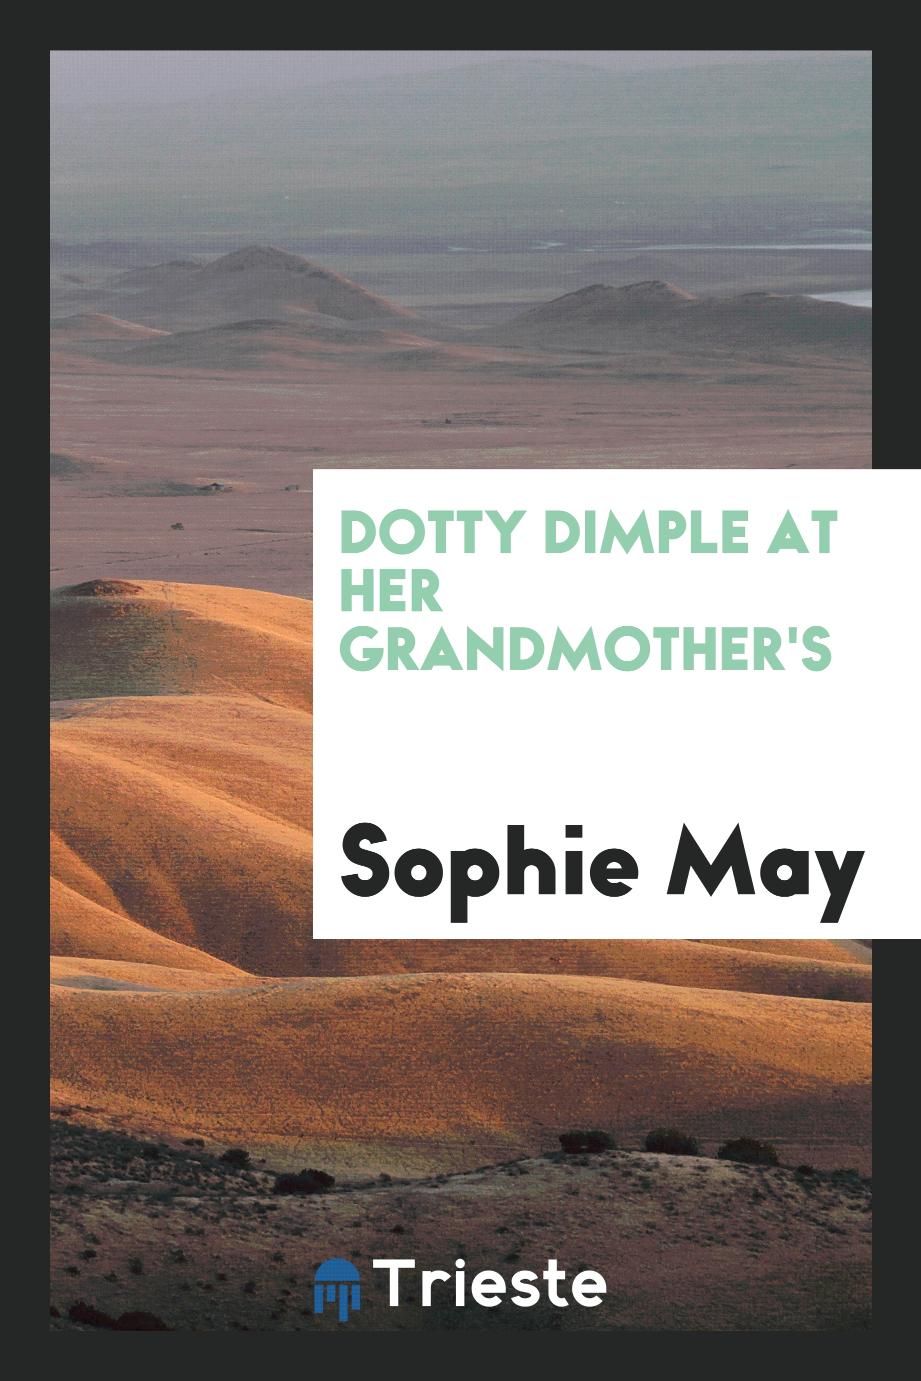 Dotty Dimple at her grandmother's